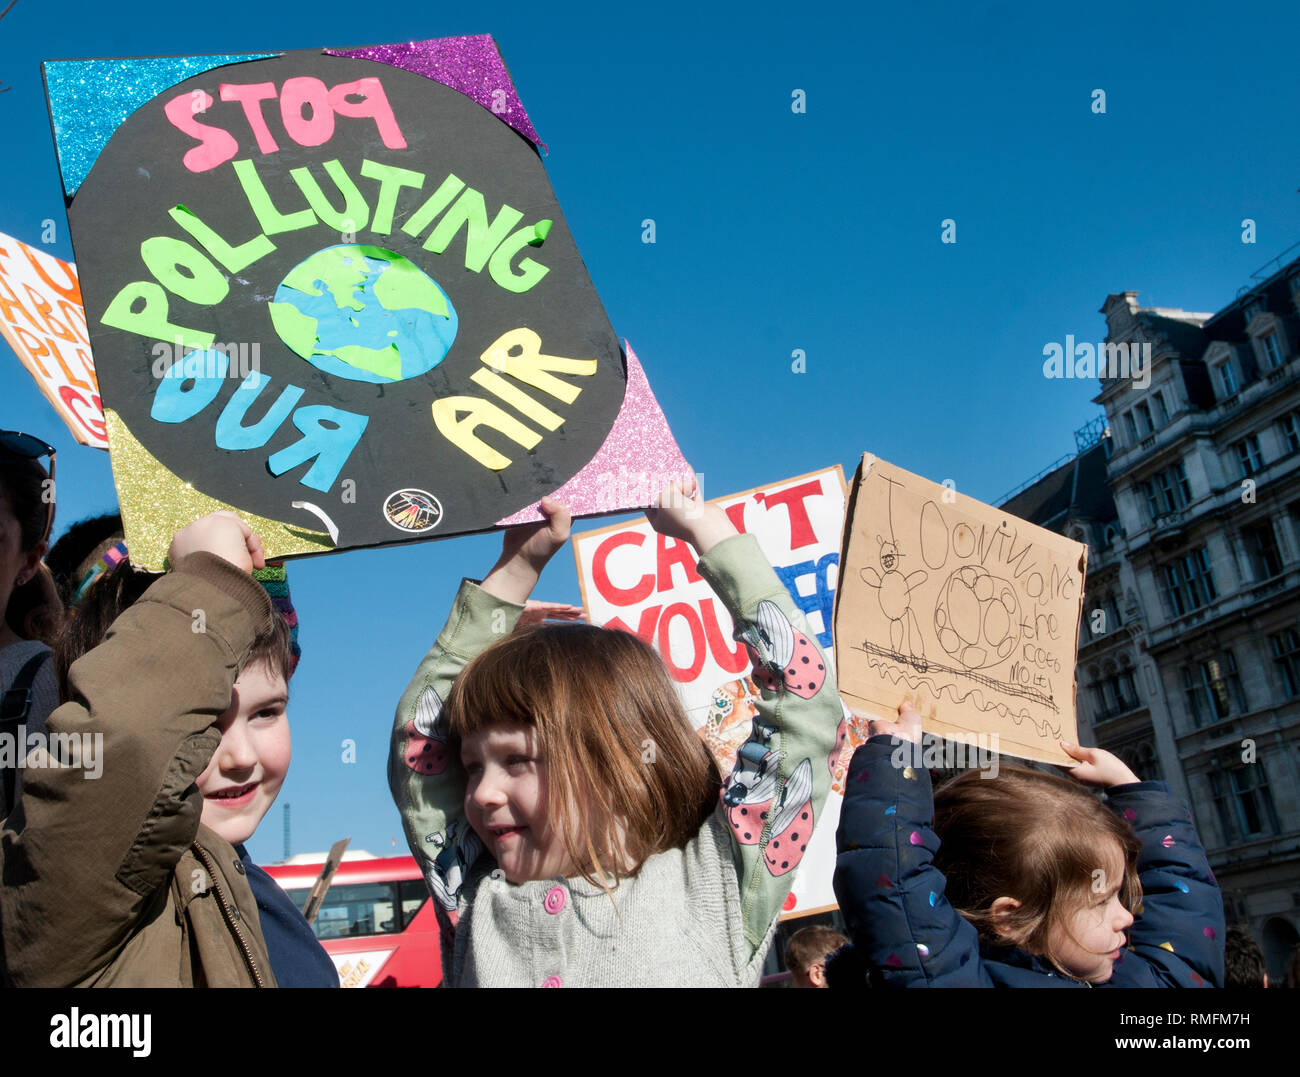 London, UK. 15th Feb, 2019. Thousands of schoolchildren and young people in the UK have taken part in climate strikes, walking out of school to protest at government inaction on climate change as part of a global campaign for action on climate change.The school strikes have been inspired by young Swedish activist Greta Thurnberg who since August 2018 has been protesting on Fridays. In London several thousands children and students gathered in Parliament Square, Westminster. Credit: Jenny Matthews/Alamy Live News Stock Photo